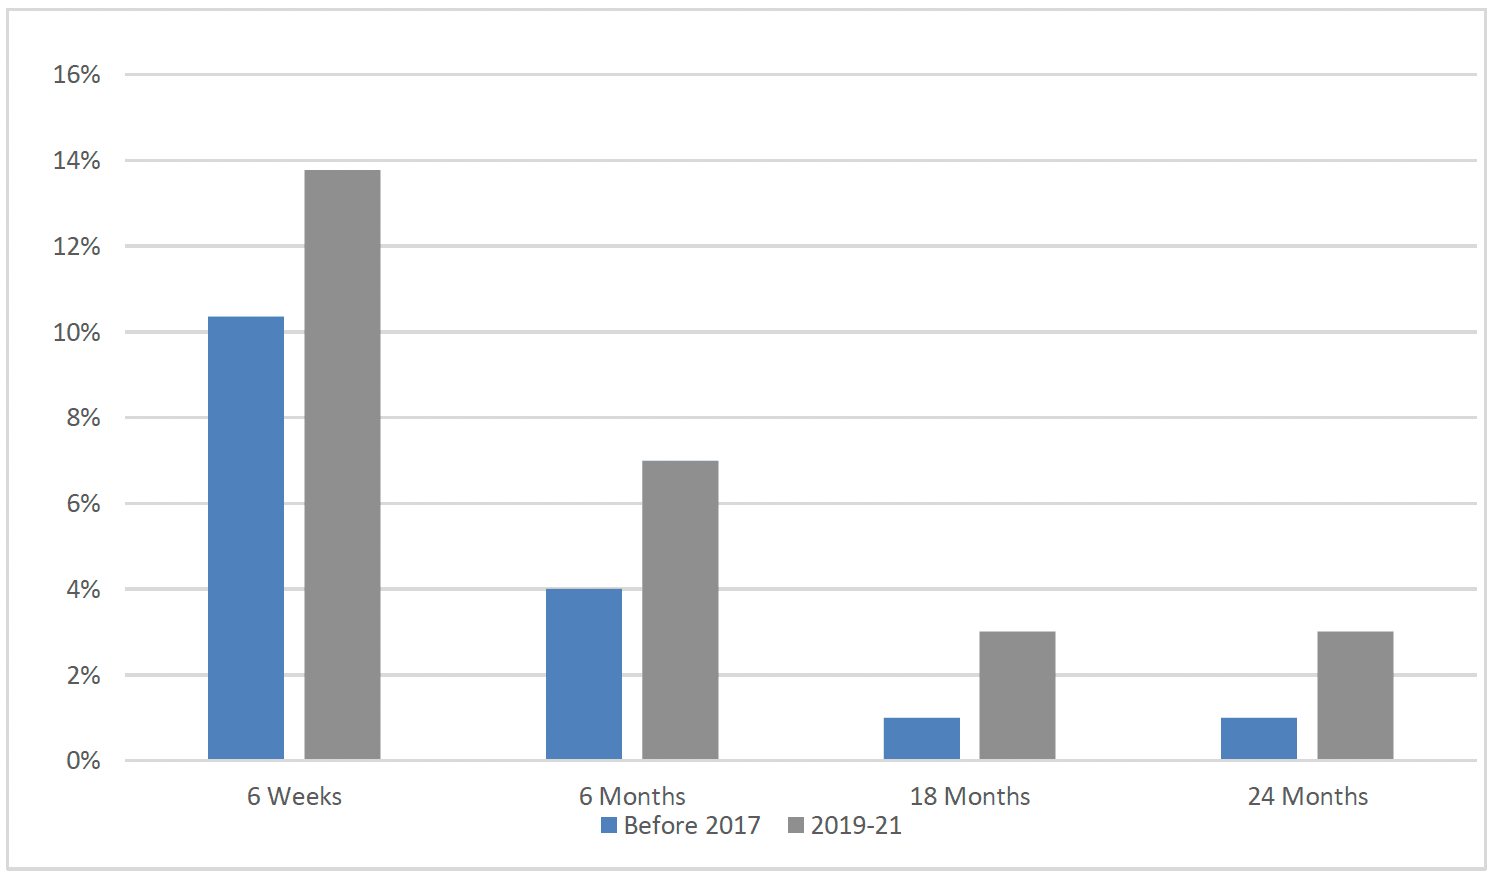 Chart 32 is a bar chart showing the proportion of FNP clients who graduated up to 2017 and between 2019-21 who were breastfeeding at 6 weeks, 6 months, 18 months and 24 months. The proportion of clients breastfeeding at each time-point was higher for those graduating between 2019-21 than those graduating up to 2017.